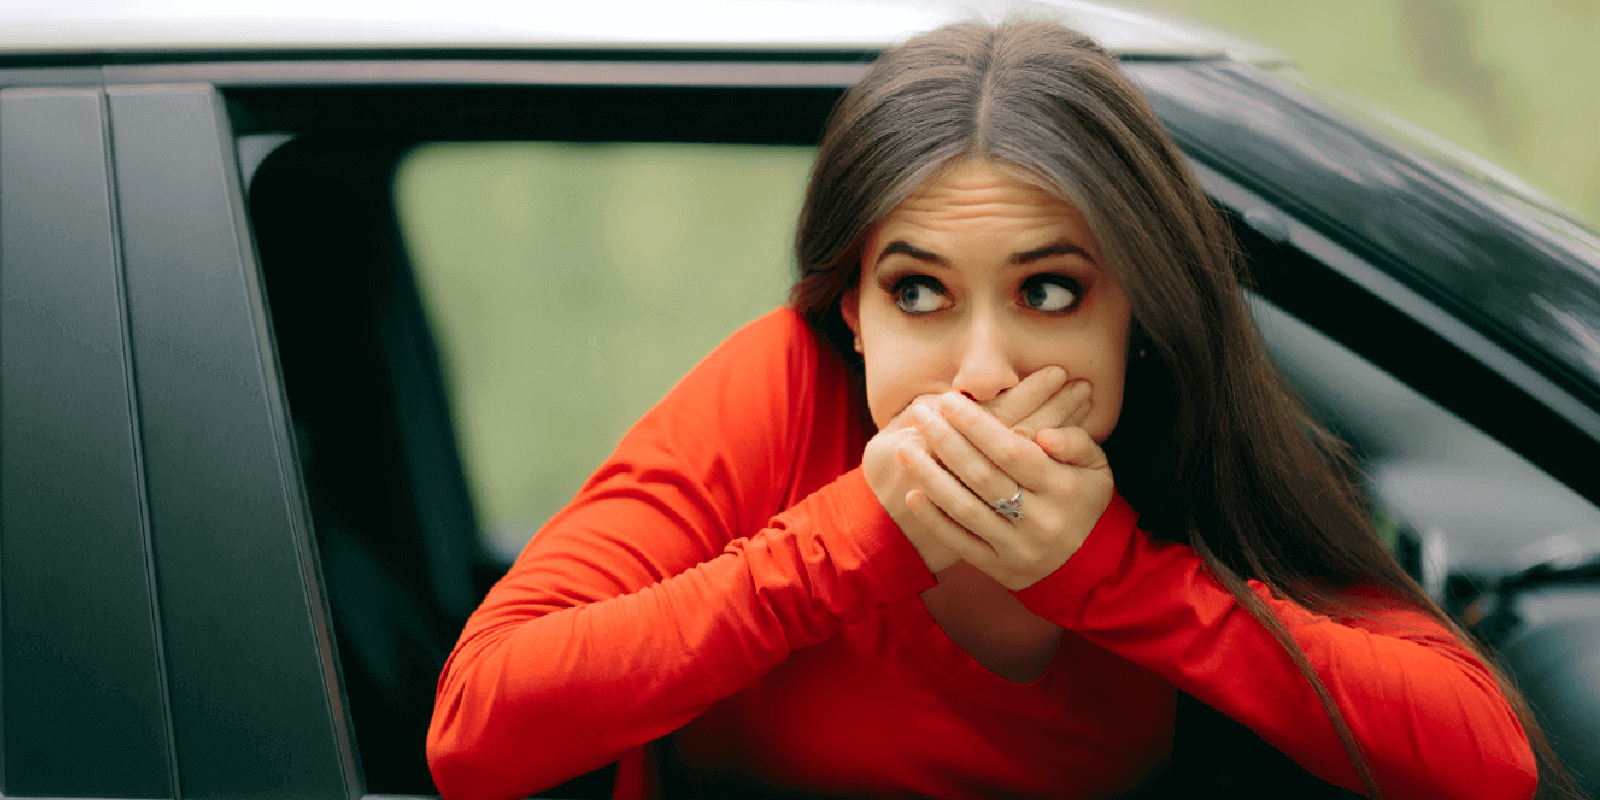 Motion Sickness: Signs,Causes, Types, Symptoms & Treatment